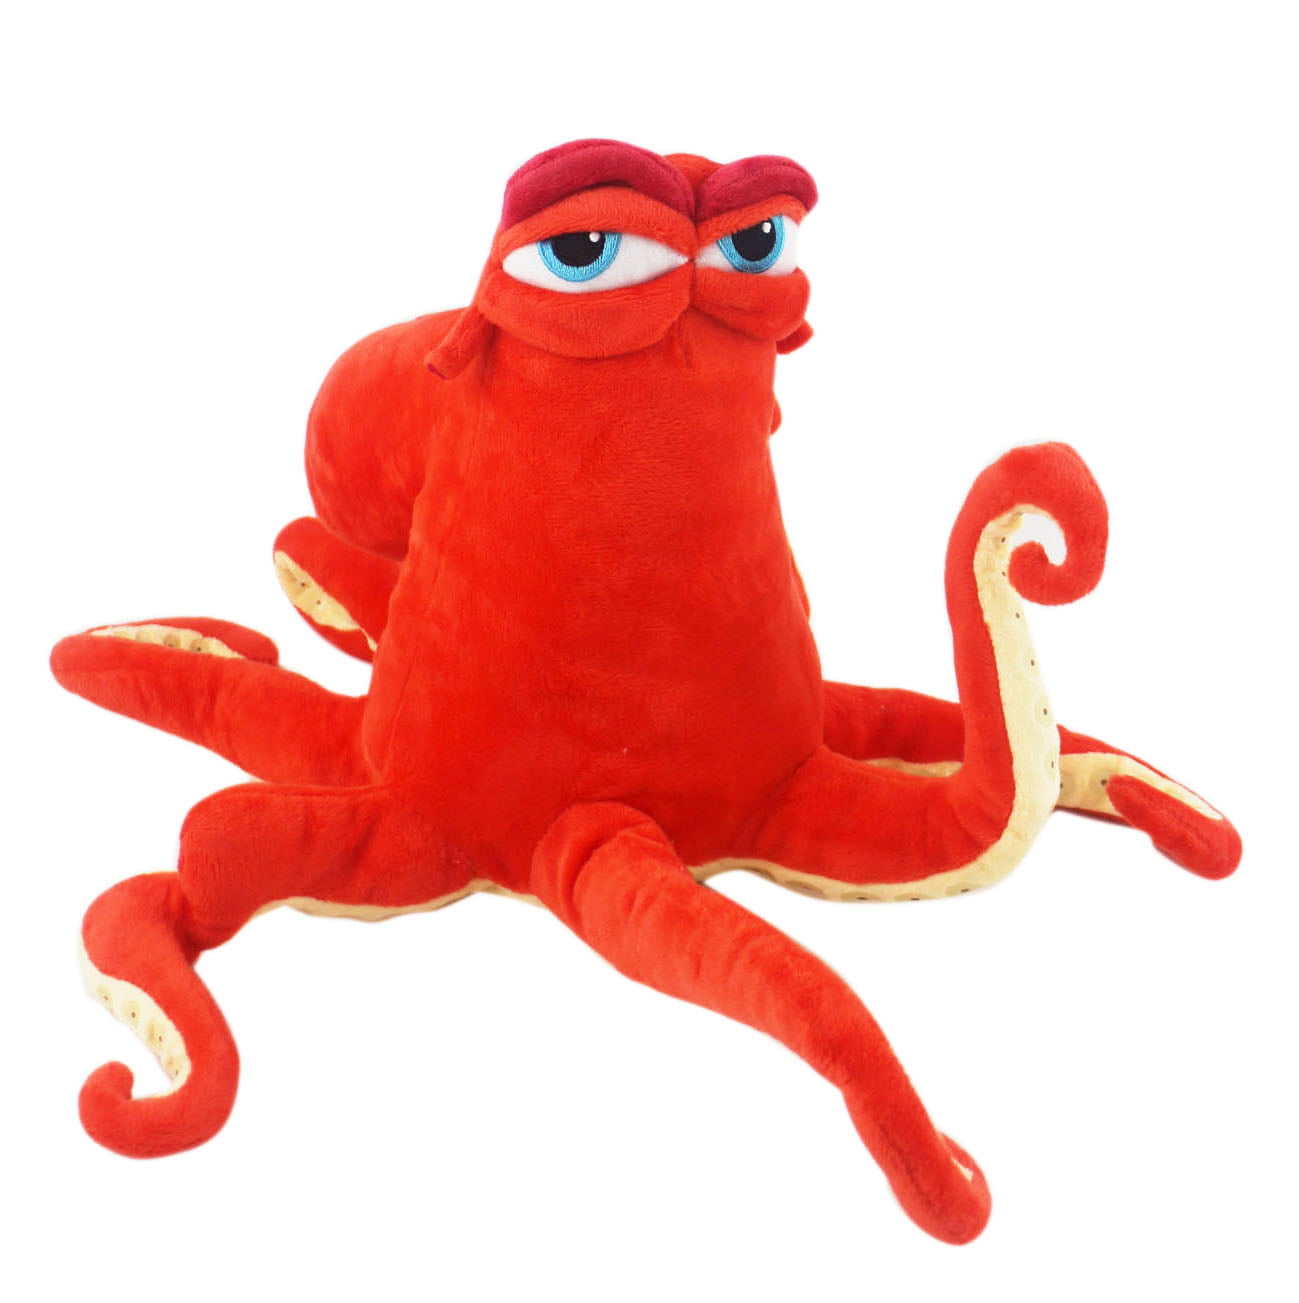 Disney Pixar Finding Dory Hank The Octopus Stuffed Toy Plush Pillow Buddy 15" for sale online 